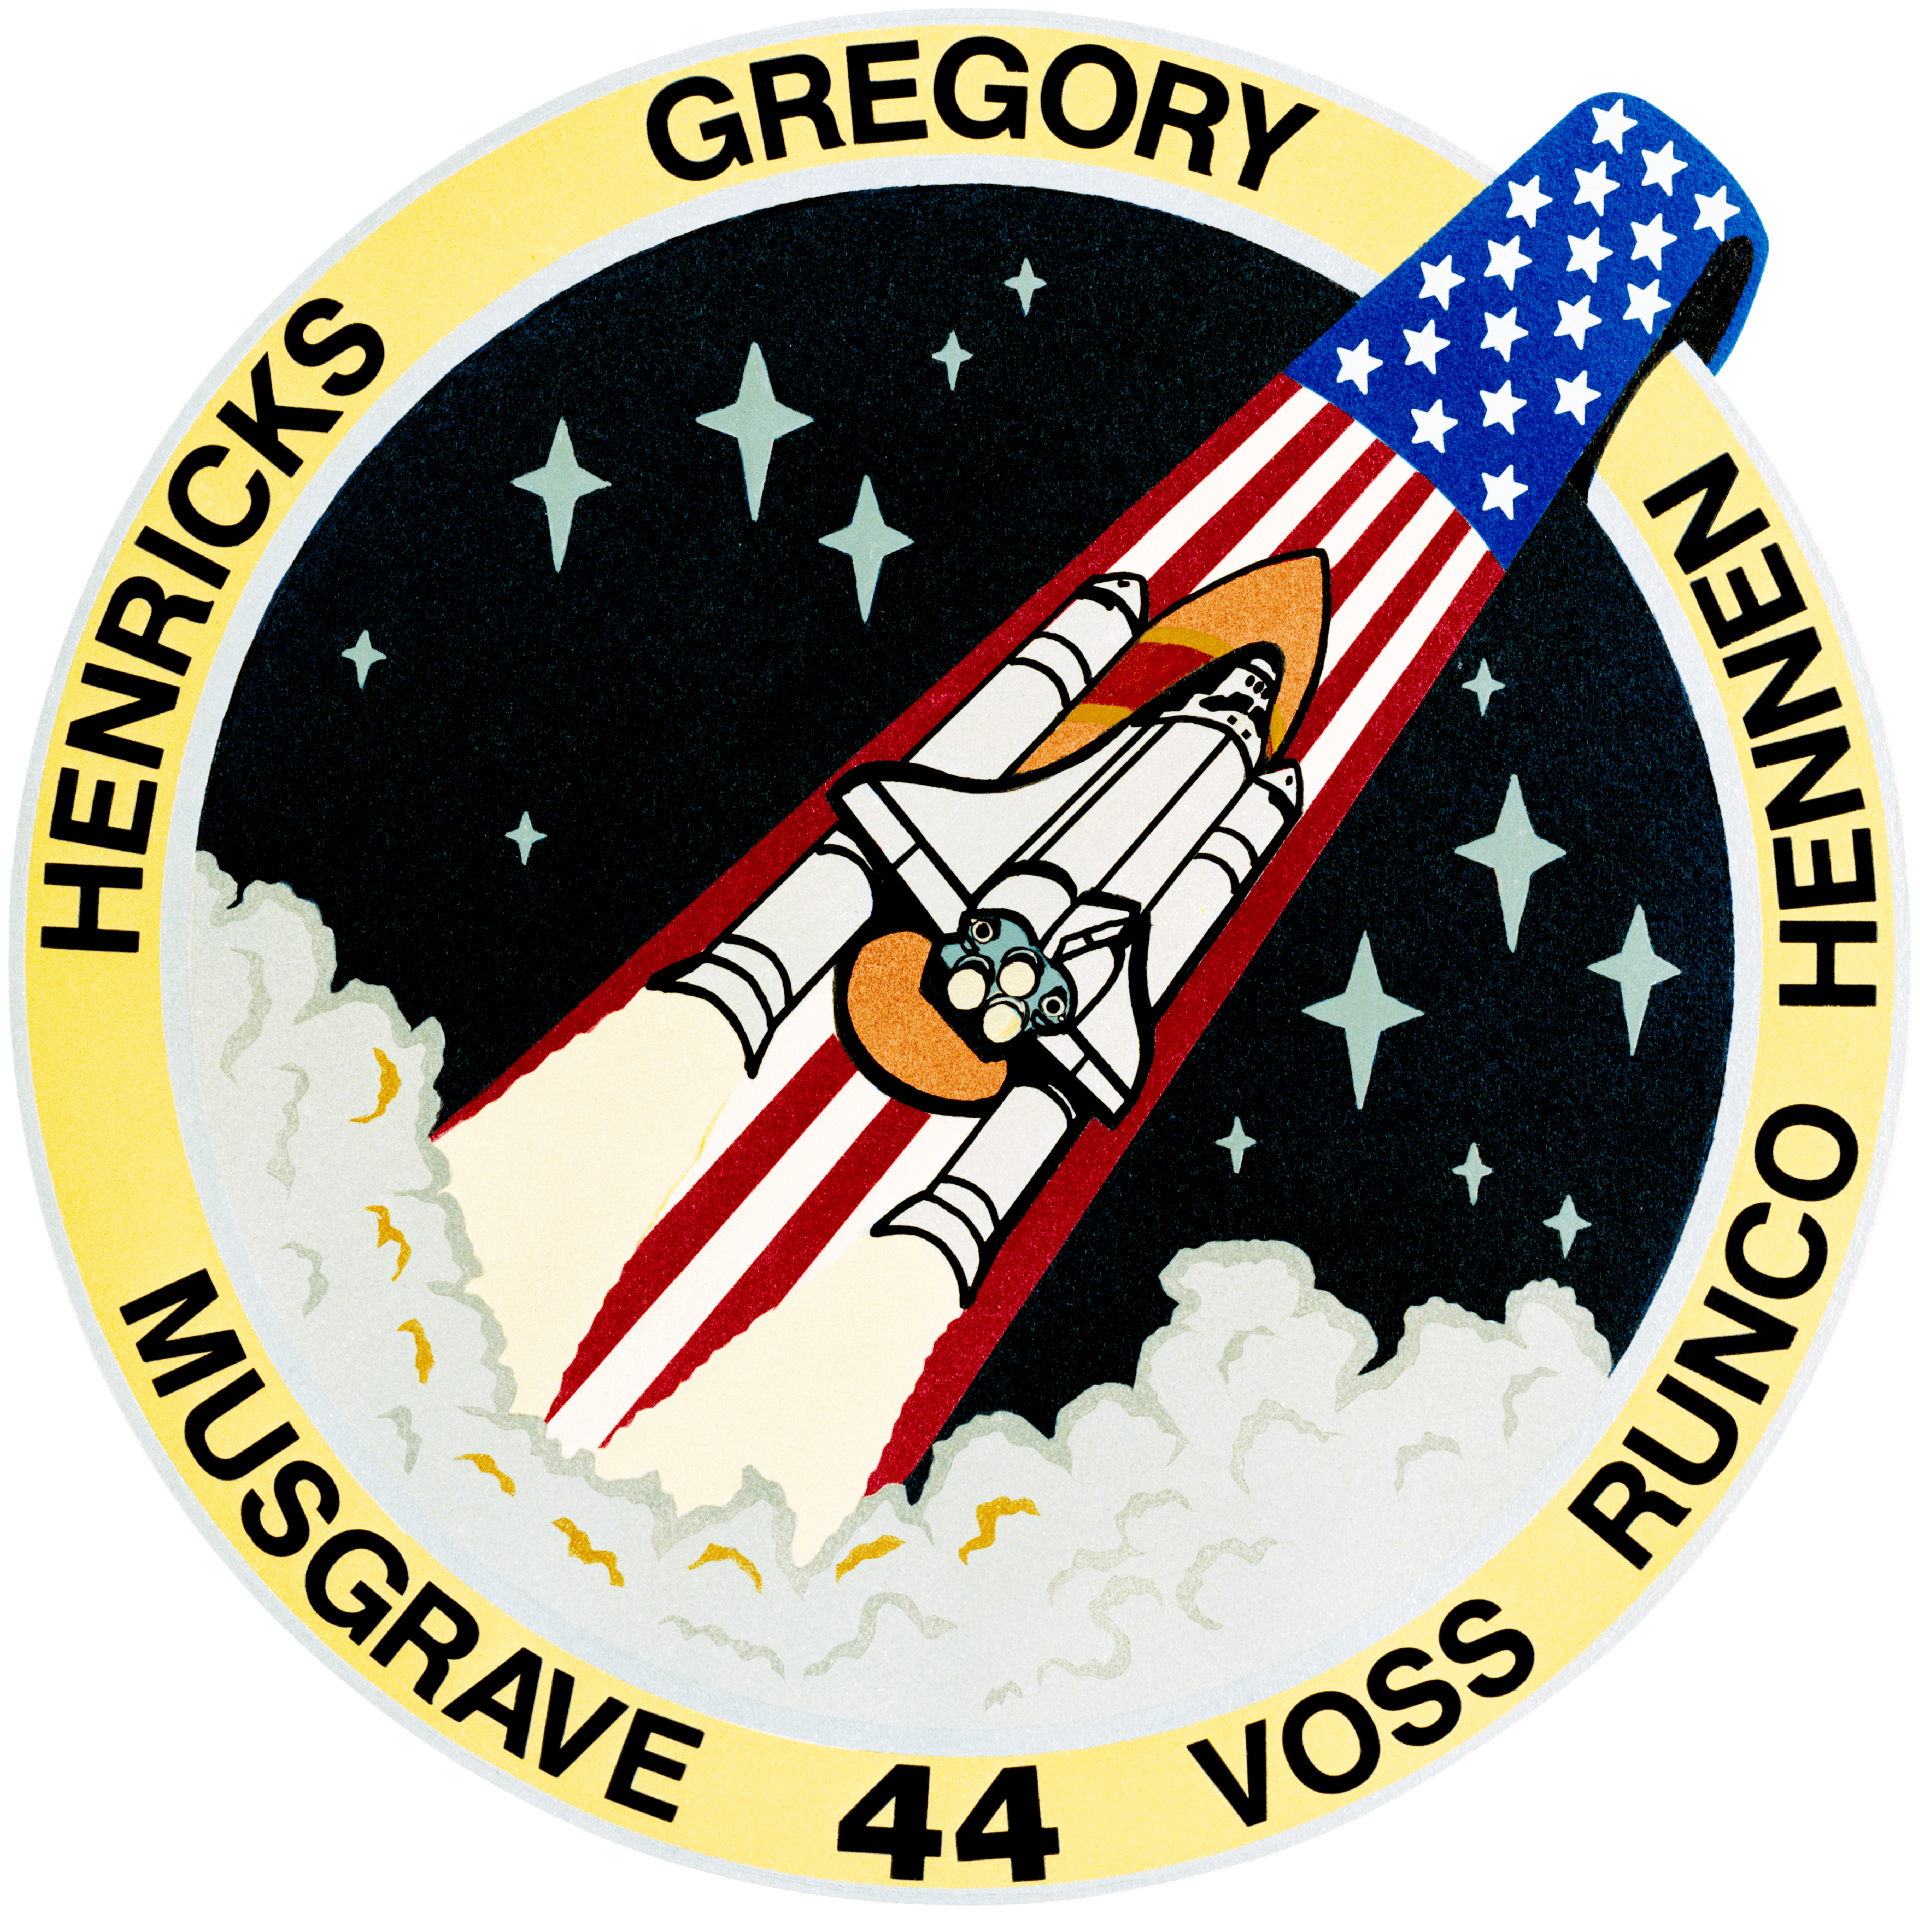 Mission patch for STS-44